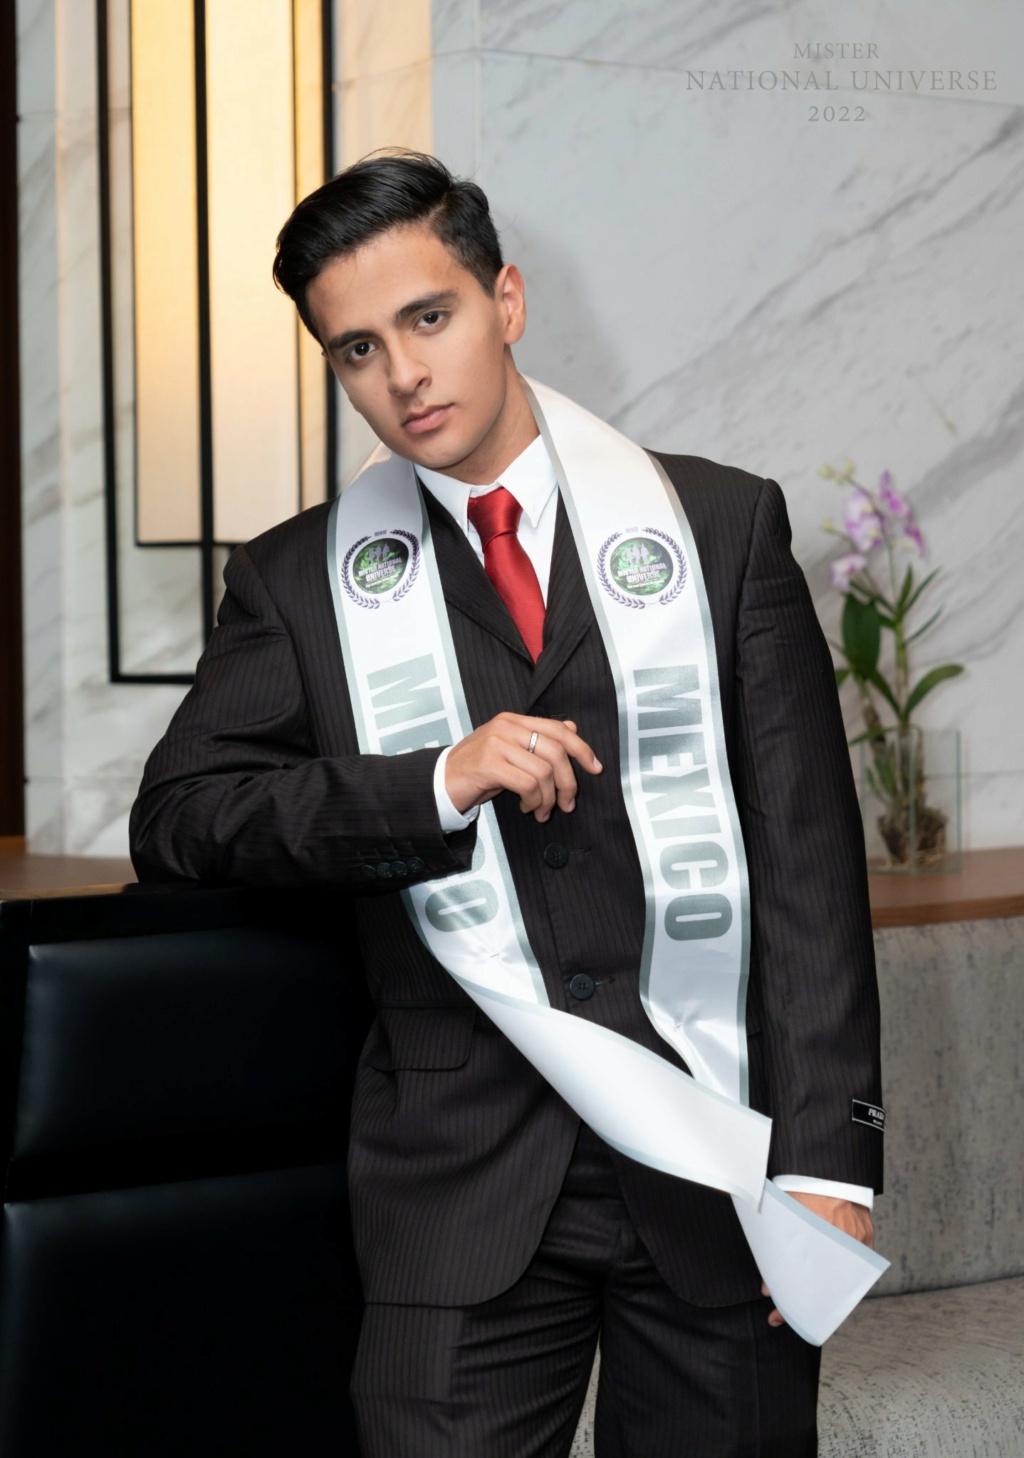 Mister National Universe 2022 is Việt Hoàng from Vietnam 28527210